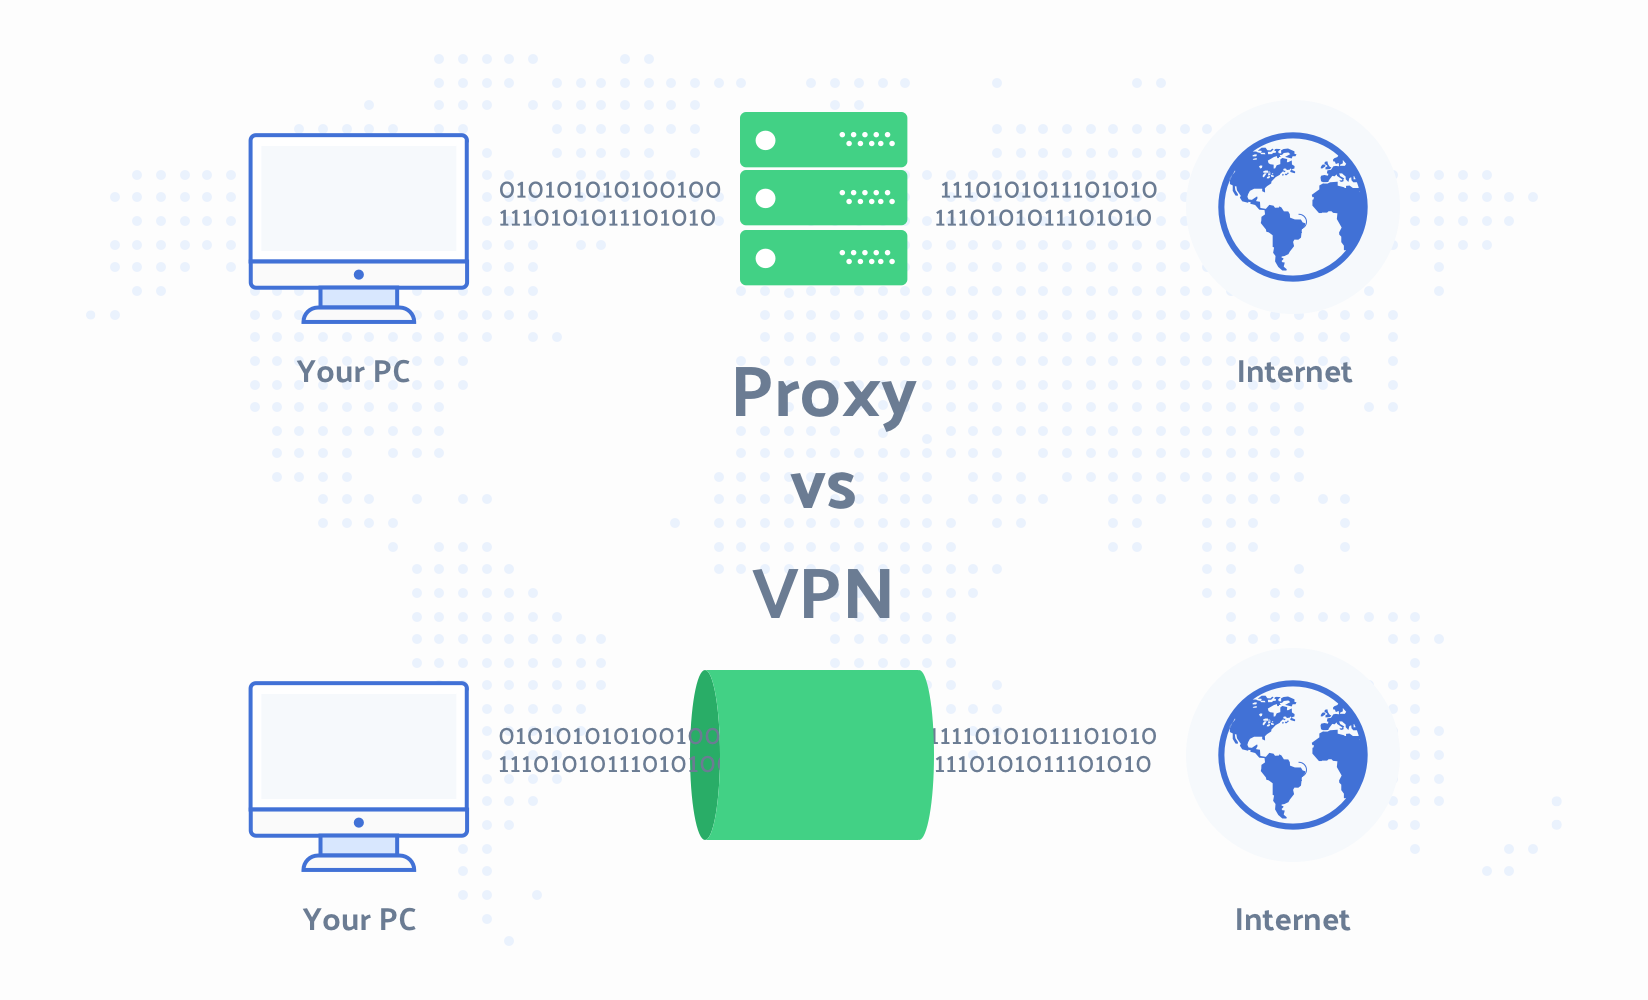 VPN vs Proxy: How are they different? Main differences revealed.